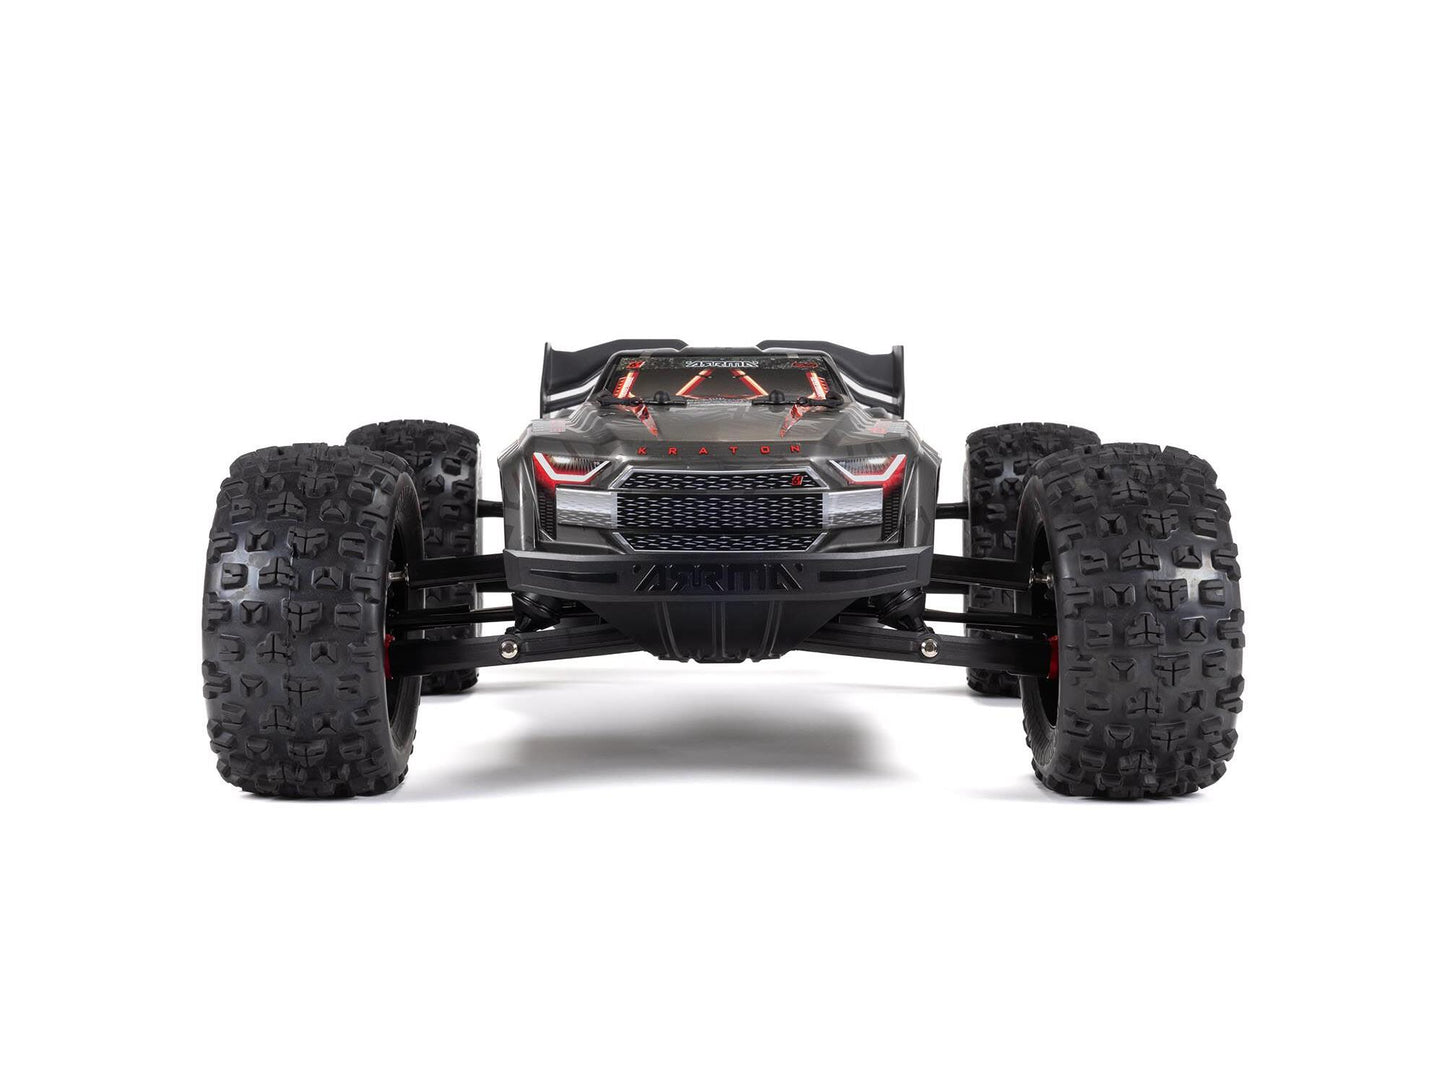 1/8 KRATON 6S BLX 4x4 EXtreme Bash Speed Monster Truck RTR